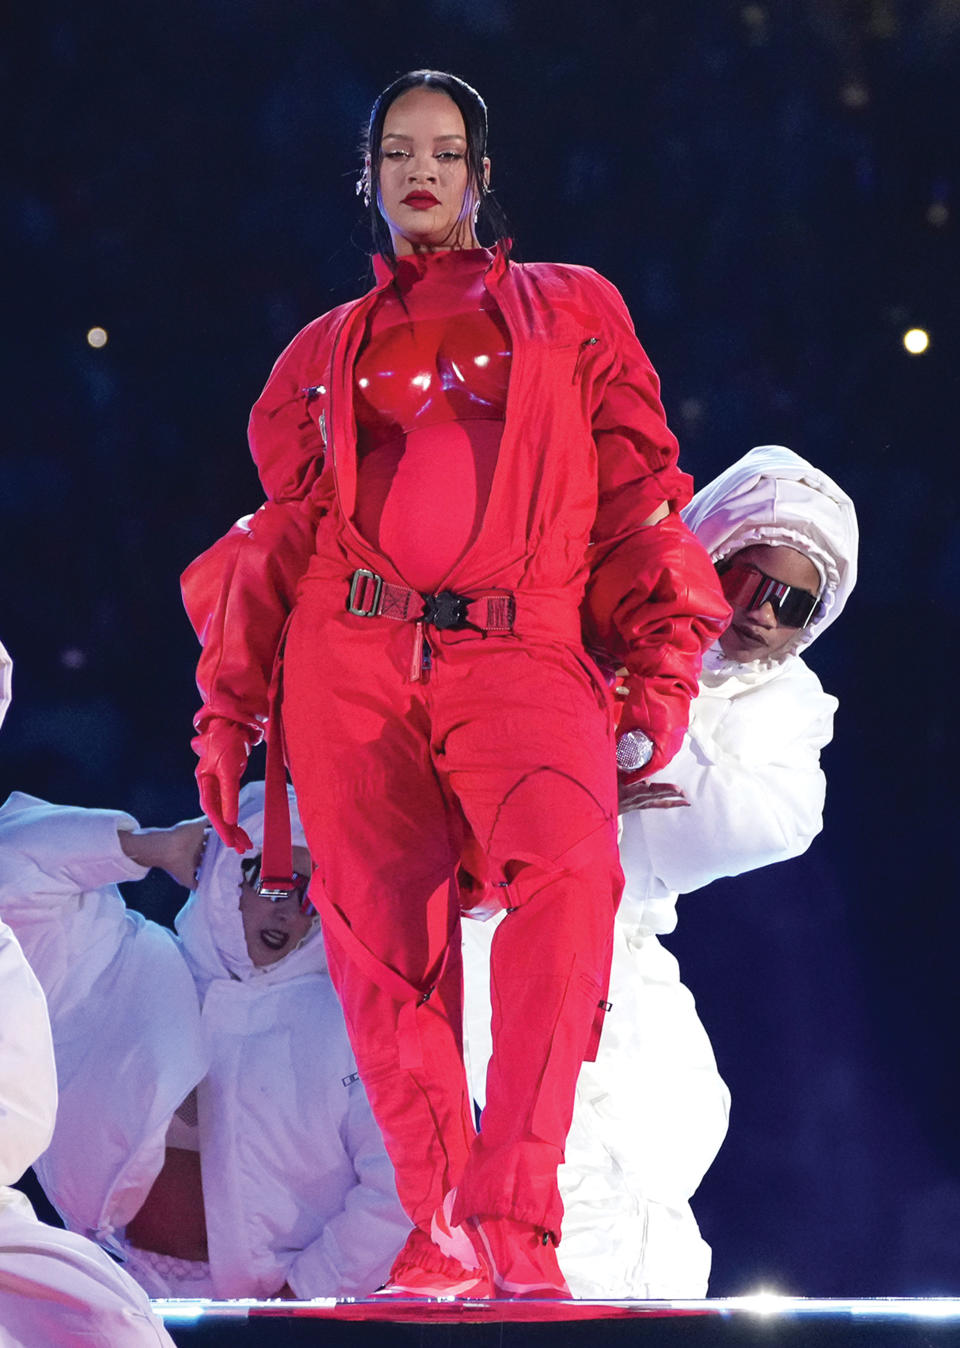 Rihanna’s Super Bowl halftime show look, built on a red Loewe catsuit, was envisioned with her stylist Jahleel Weaver and functioned as the most-watched pregnancy announcement in history with 118 million viewers.